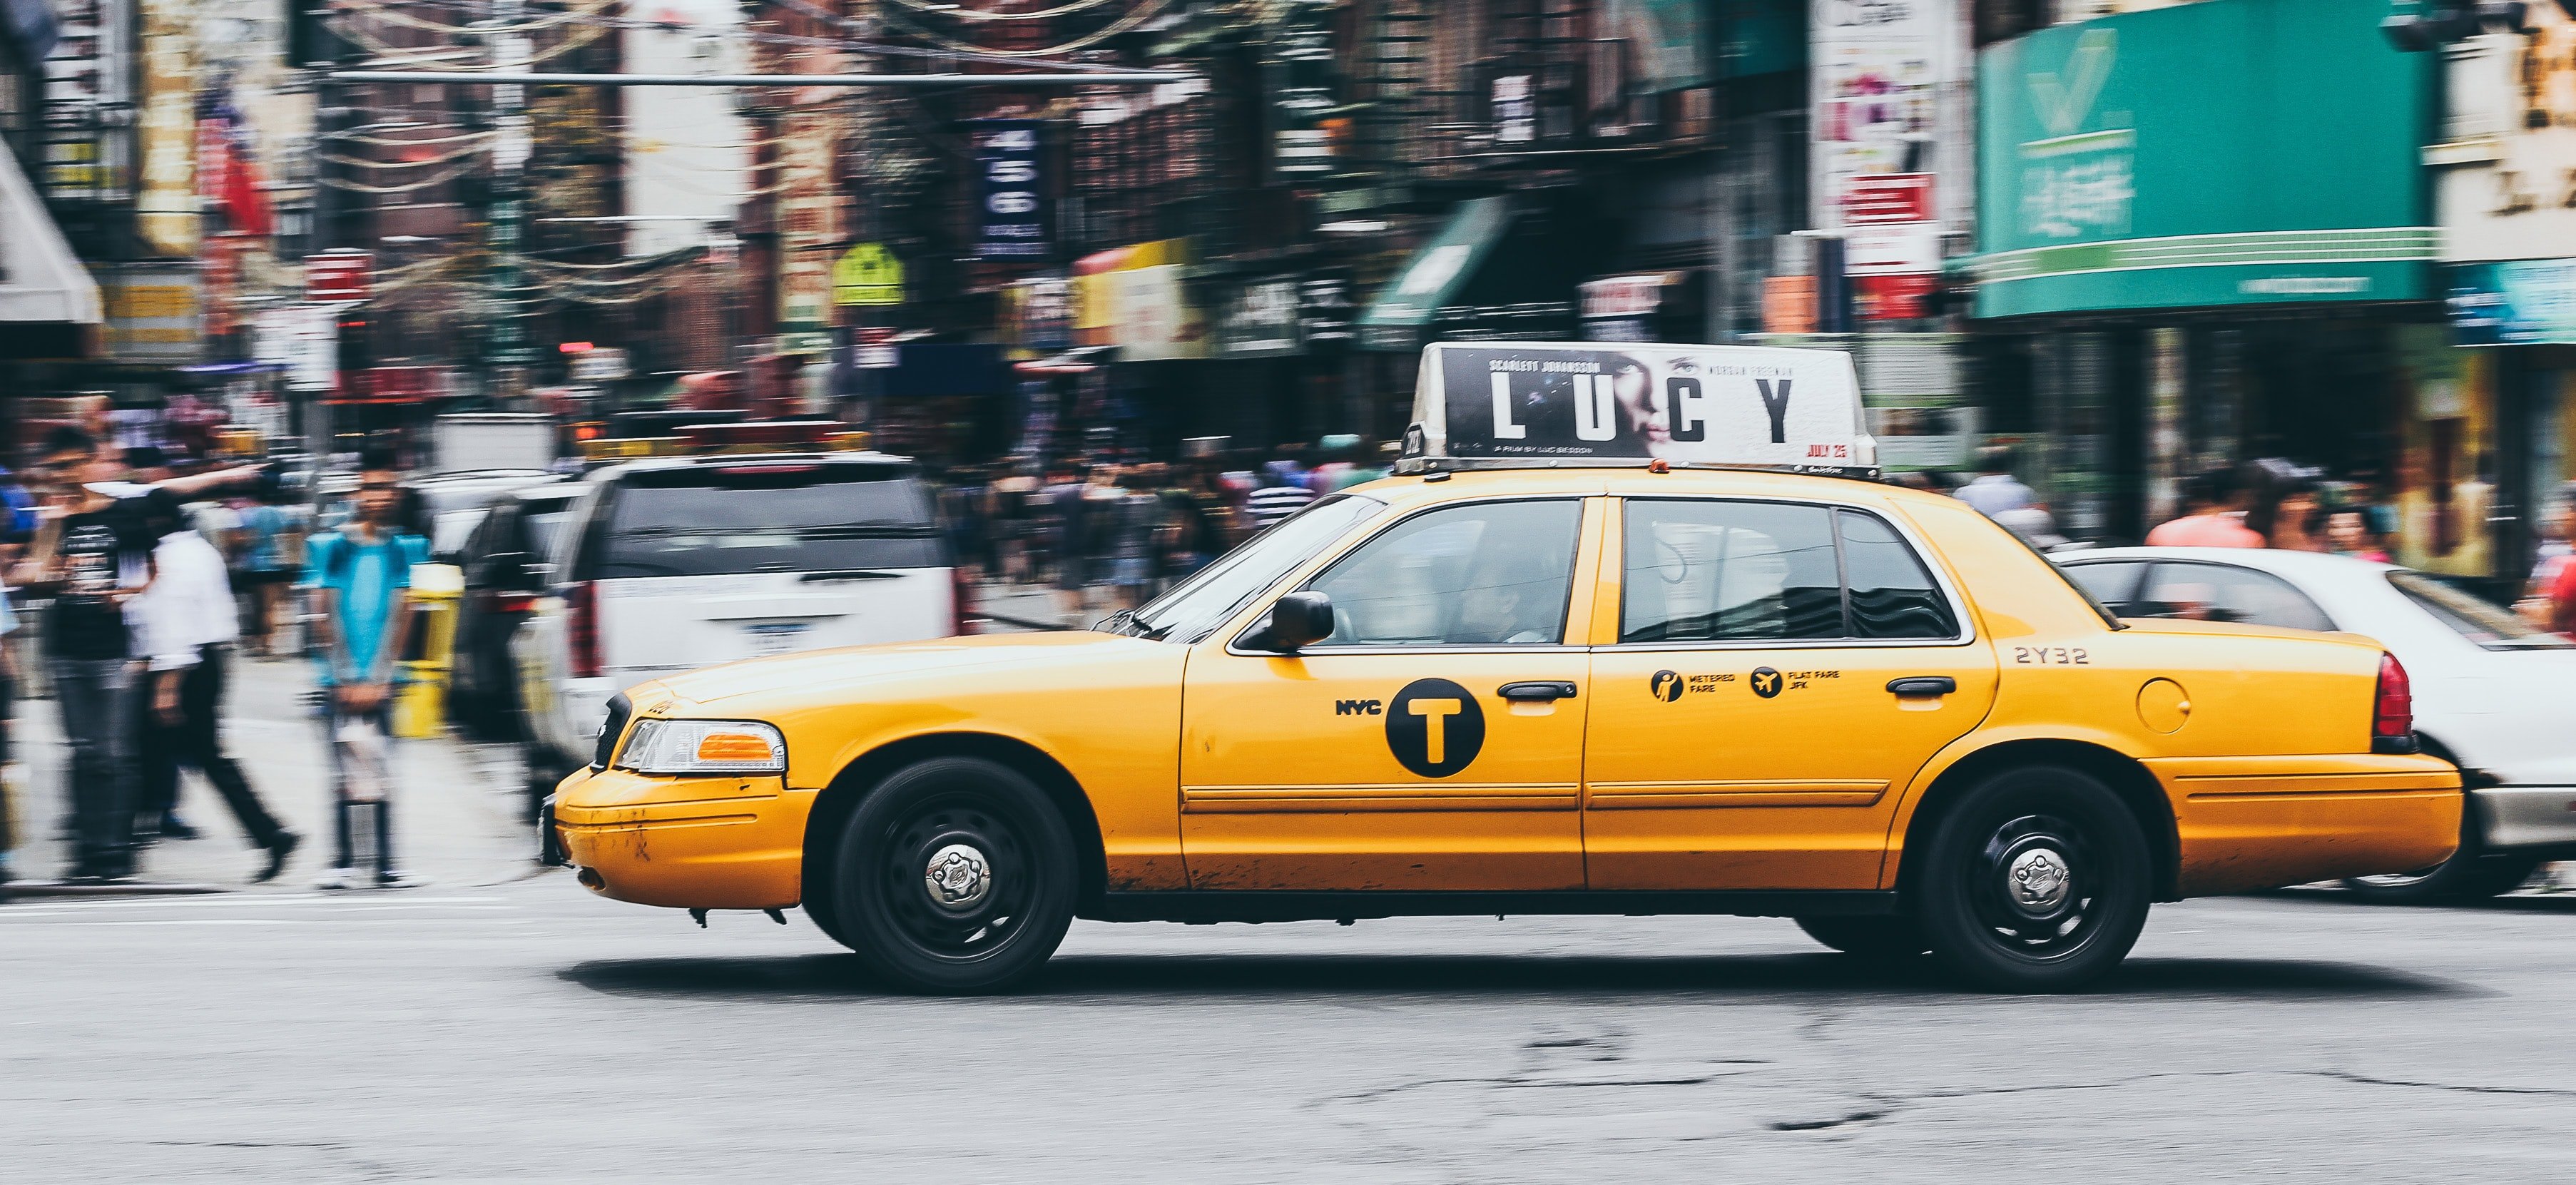 Todd followed Claire in a taxi. | Source: Unsplash